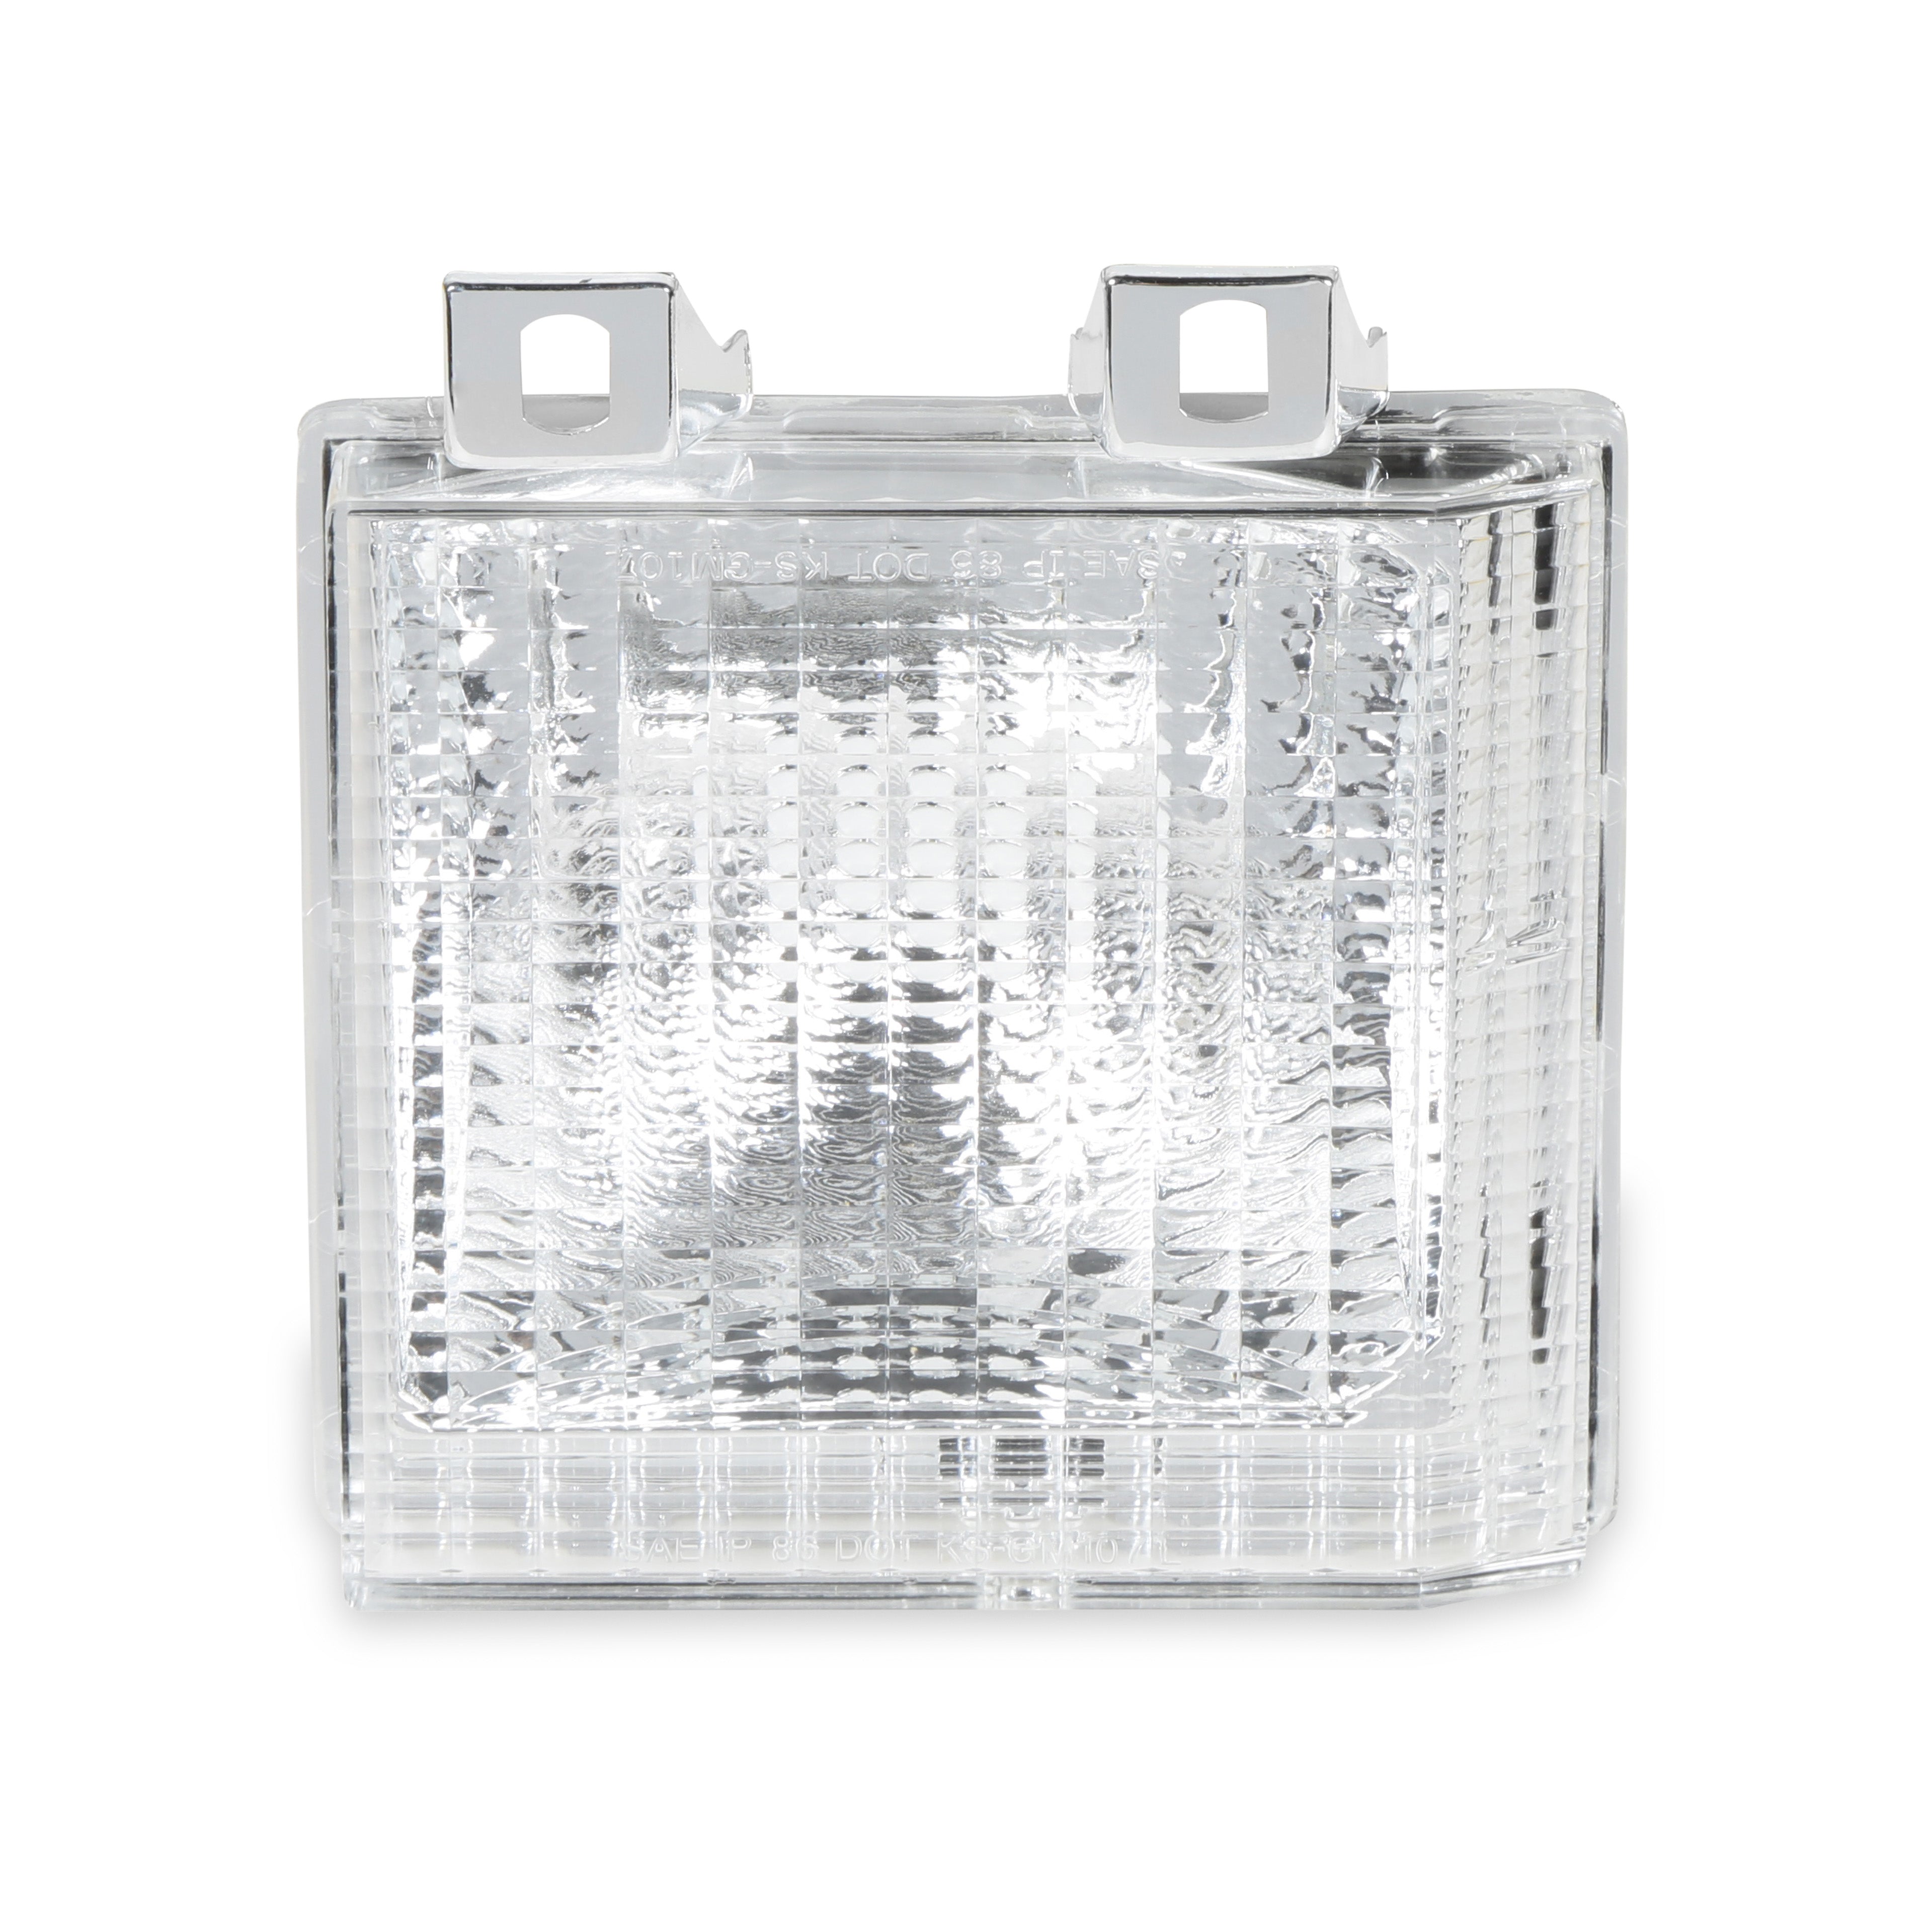 BROTHERS C/K Dual Headlight Parking Lamp - Clear - LH pn 07-101